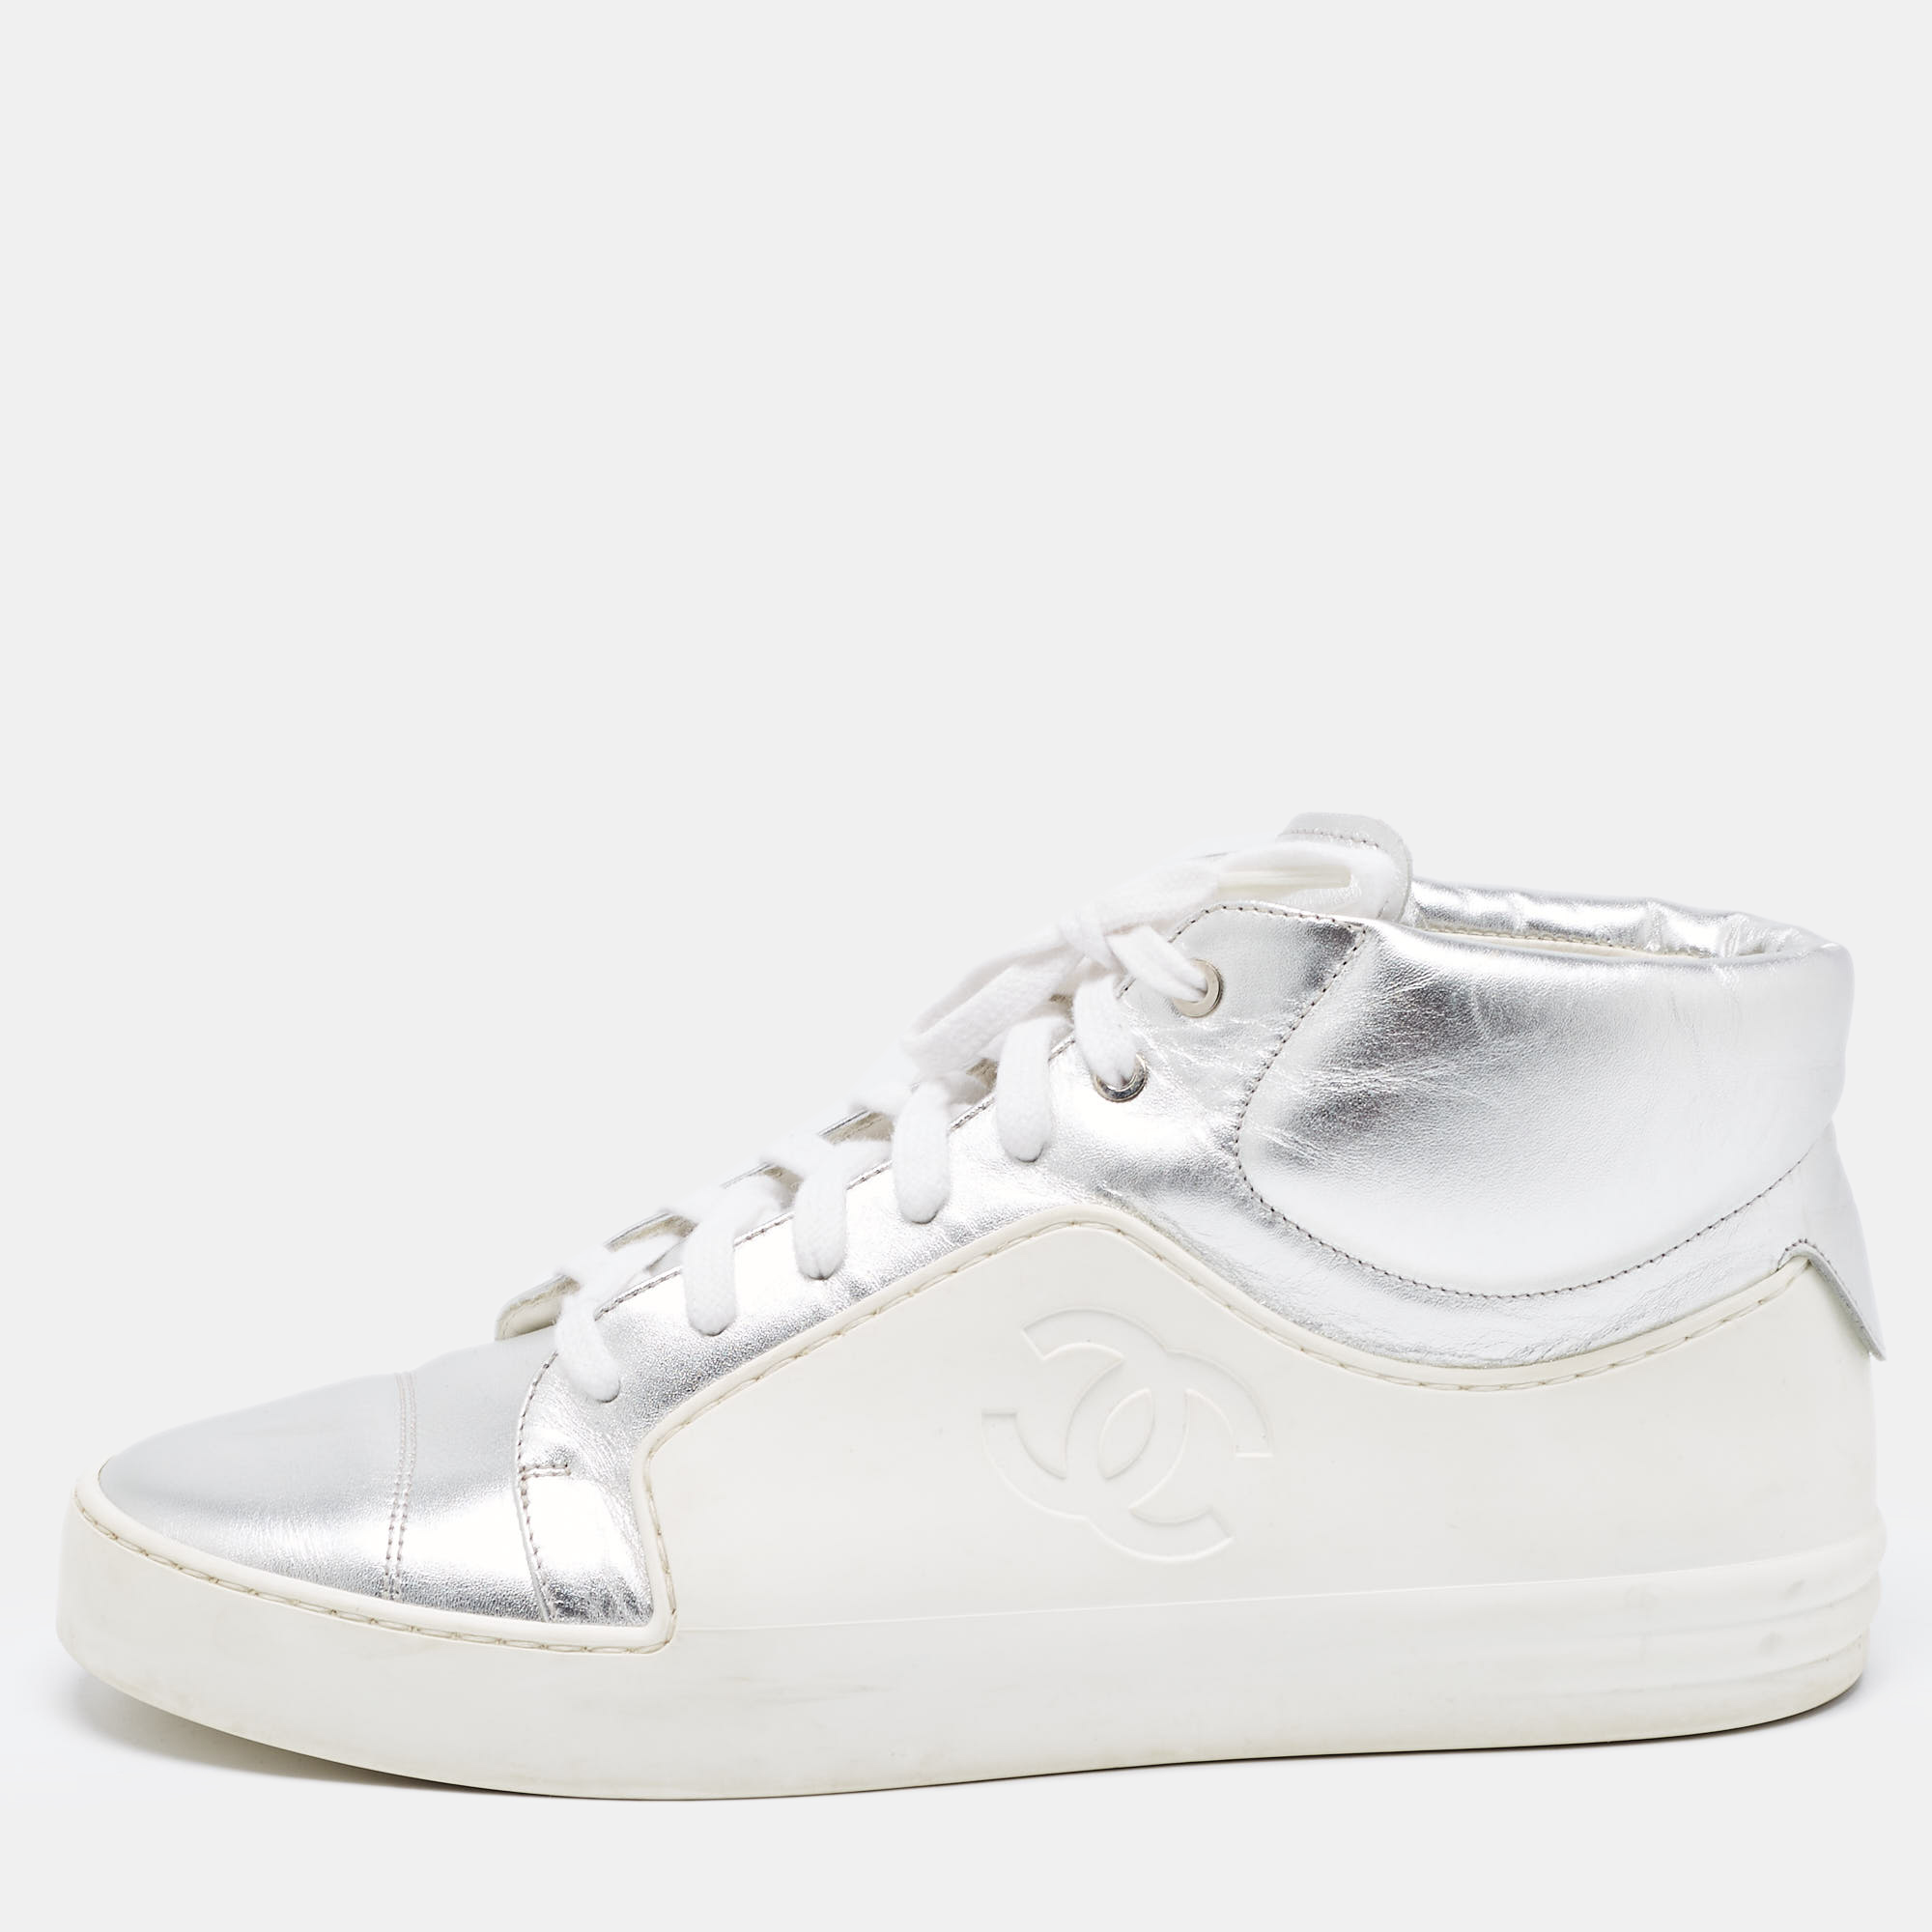 Chanel metallic silver/white leather and rubber lace up high top sneakers size 39.5